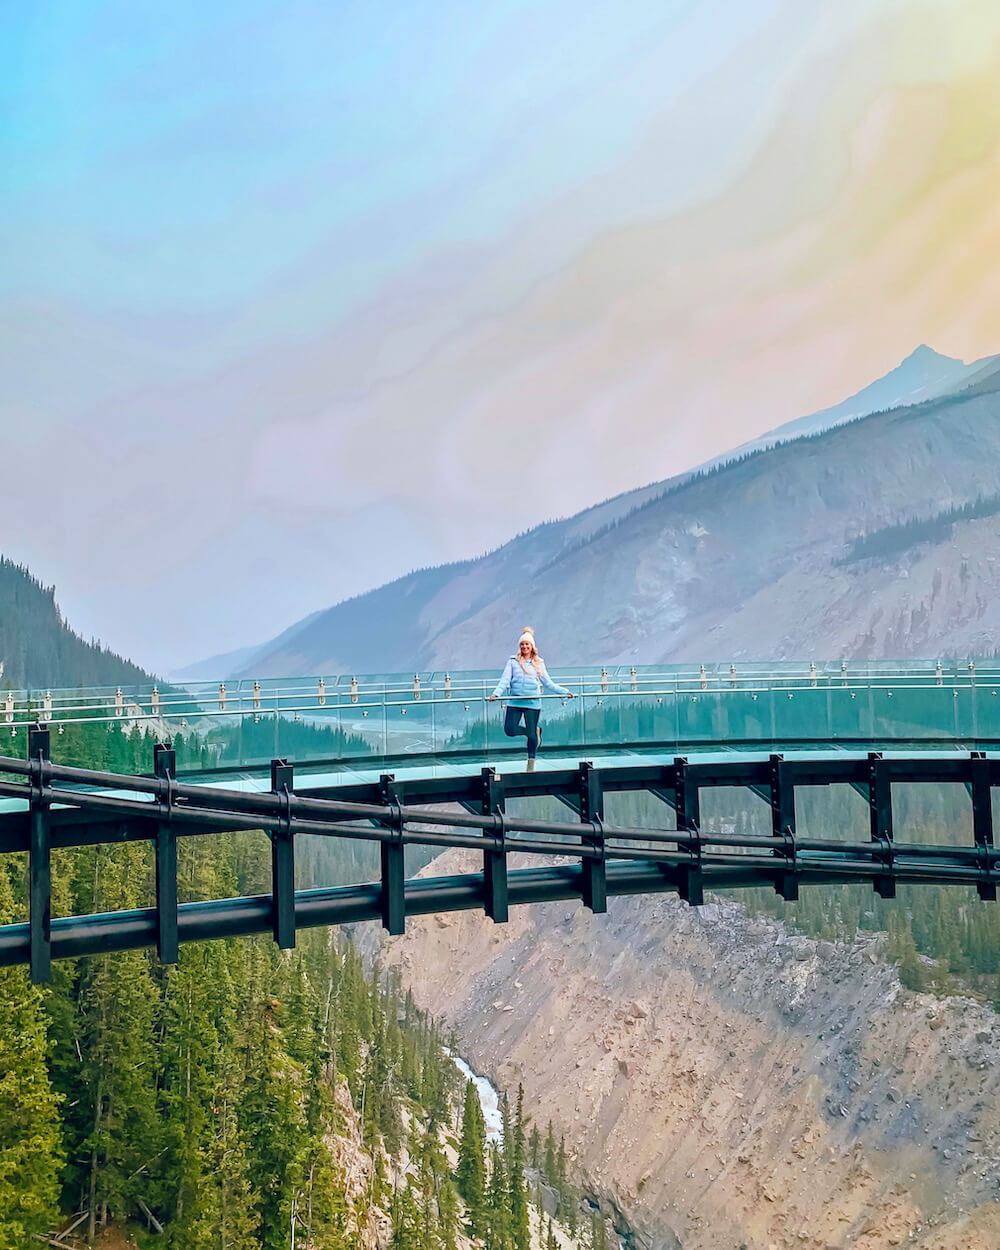 Planning a trip to Jasper National Park soon? Here's a local's guide to some of the best things to do in Jasper. From hikes and trails to adventure sports, family friendly excursions, dining experiences and more. You won't want to miss this guide of the best things to do and places to see in Jasper. Pictured here: Glacier Skywalk